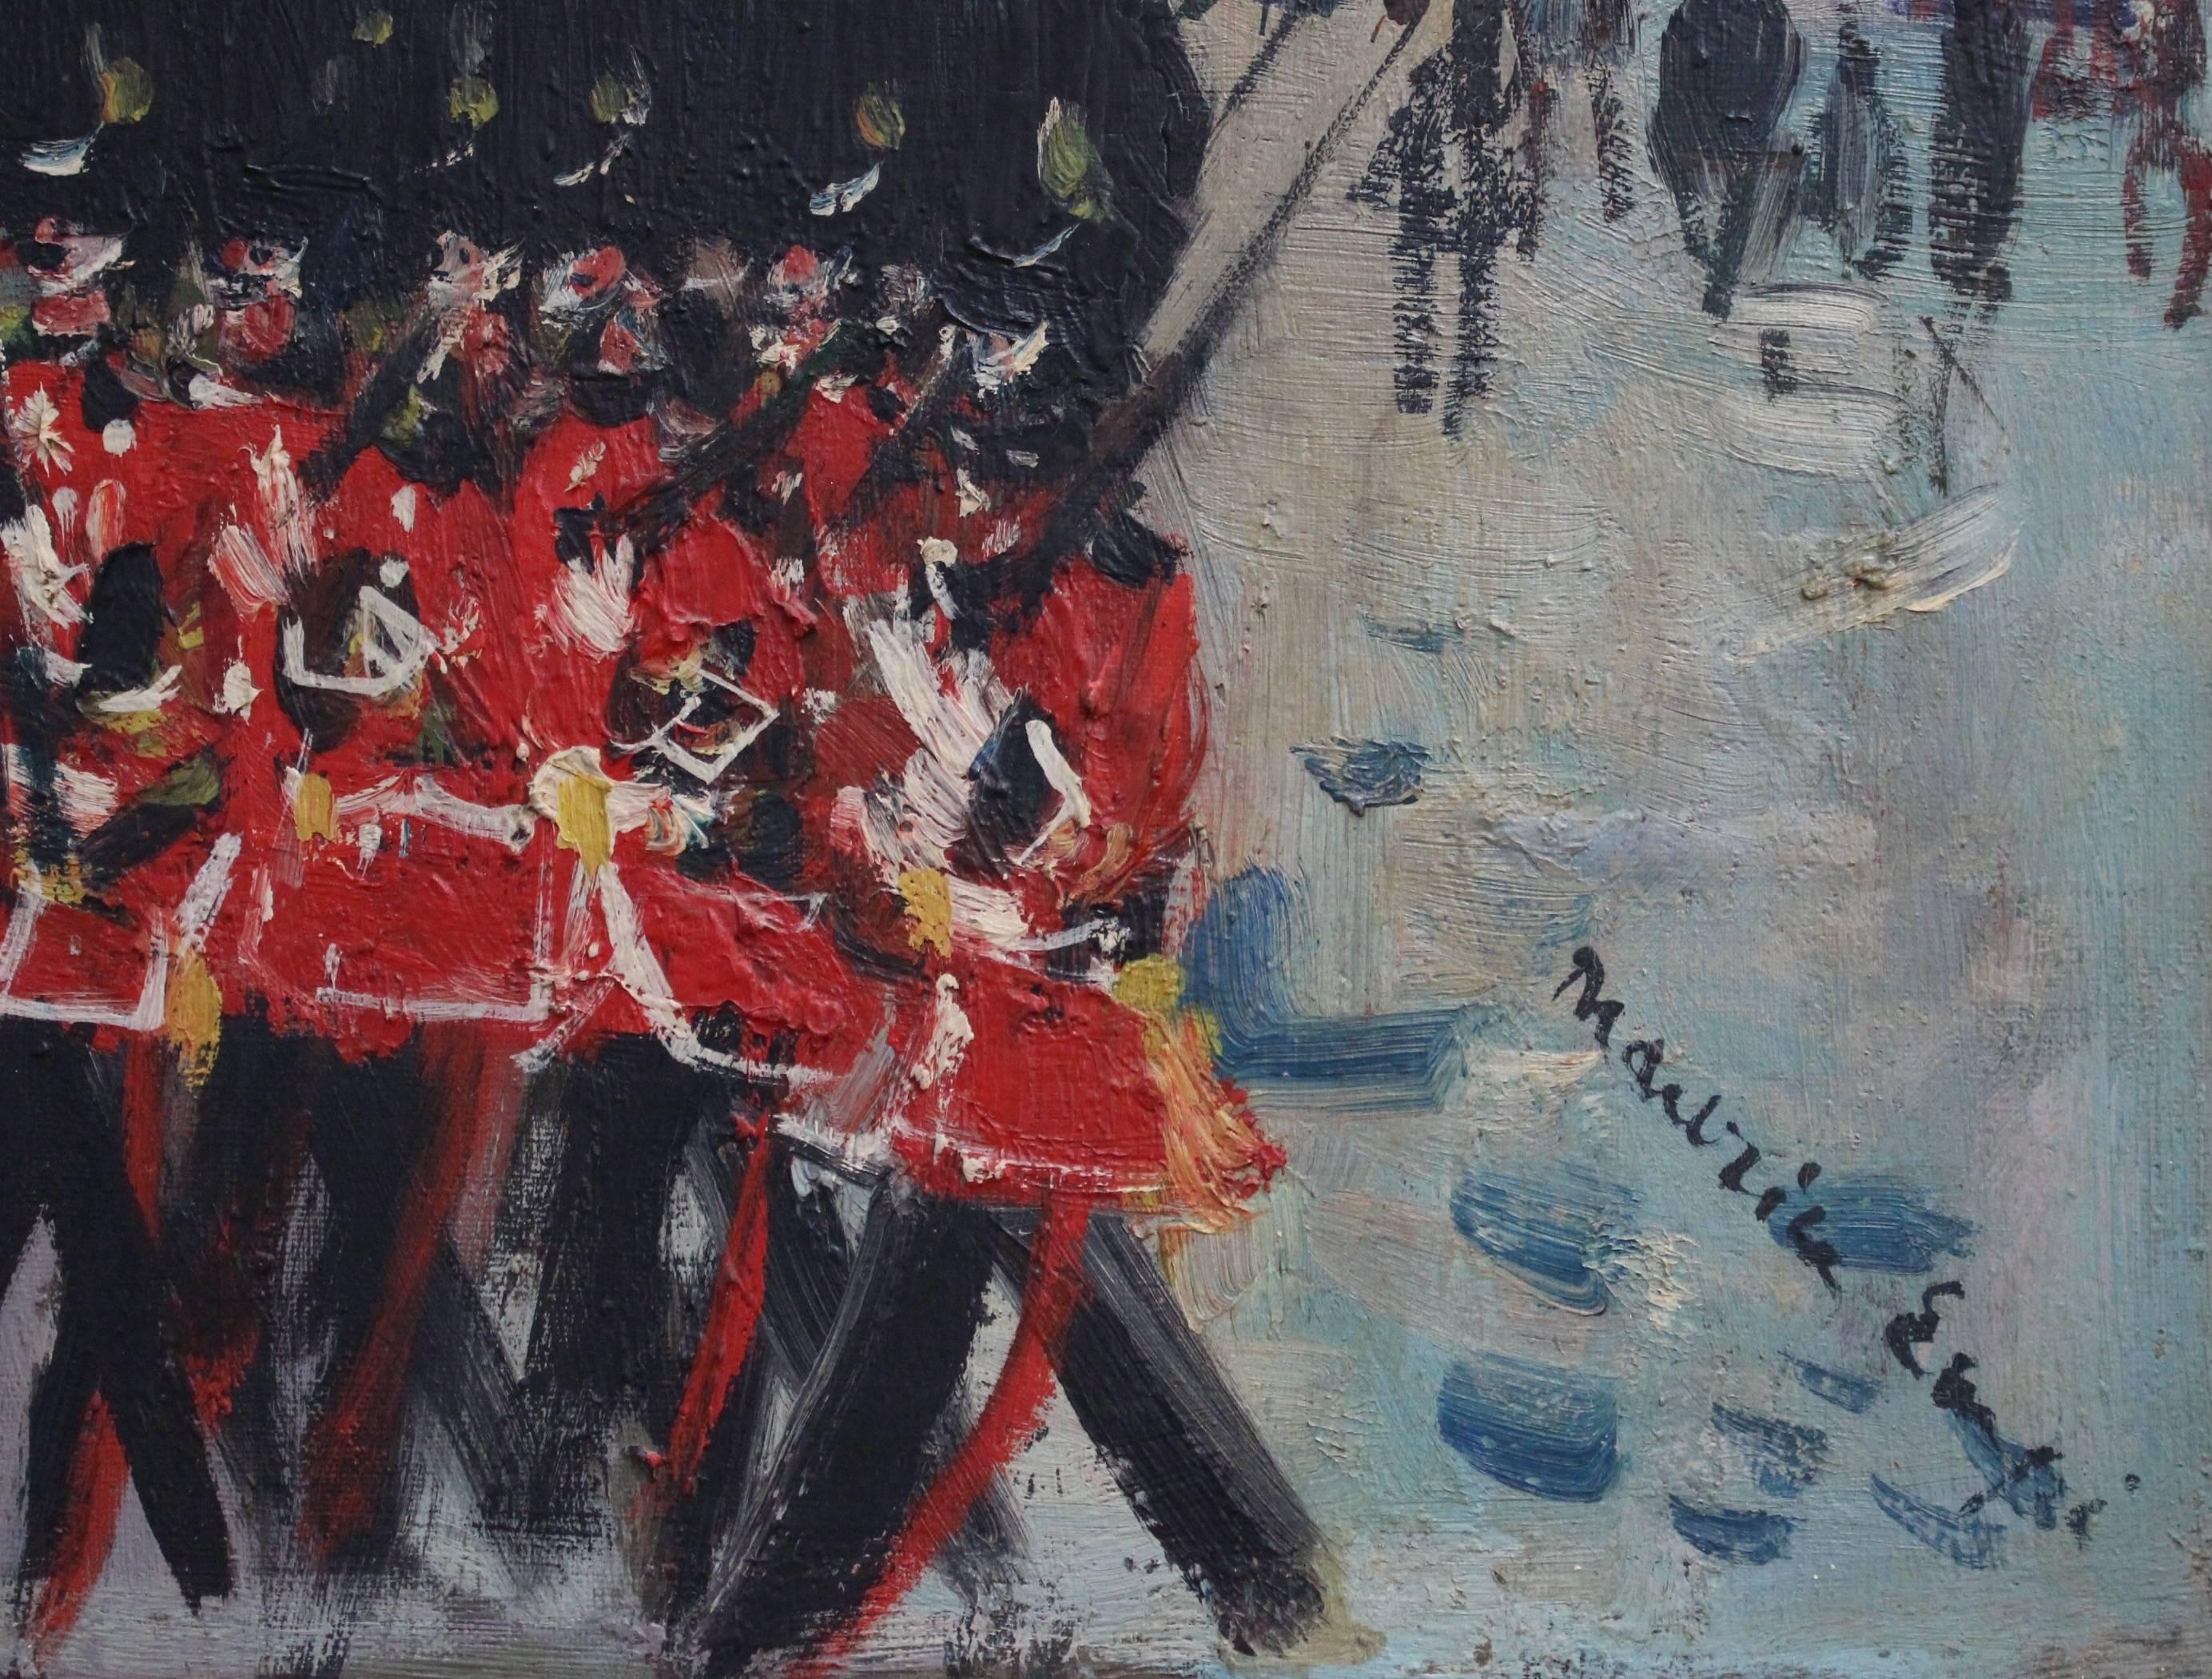 'Changing of the Guard at Buckingham Palace' by Maurice Empi, London c. 1960s  - Modern Painting by Maurice EMPI